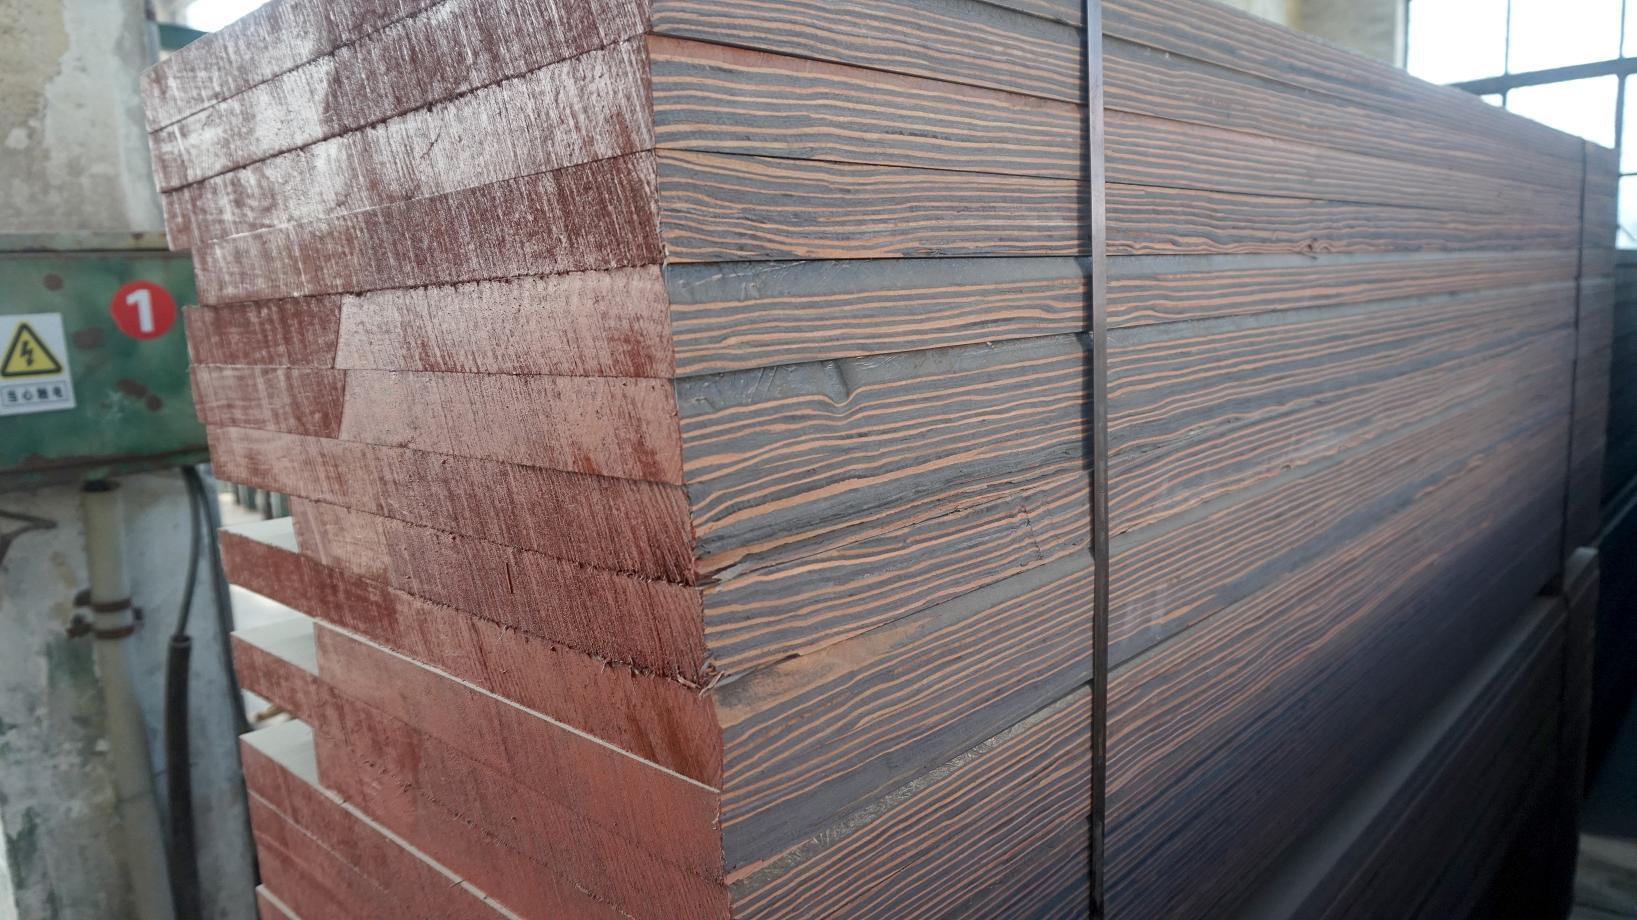 High Quality Engineered Zebre Wood, Zebre Engineered Wood Timber for Sale!